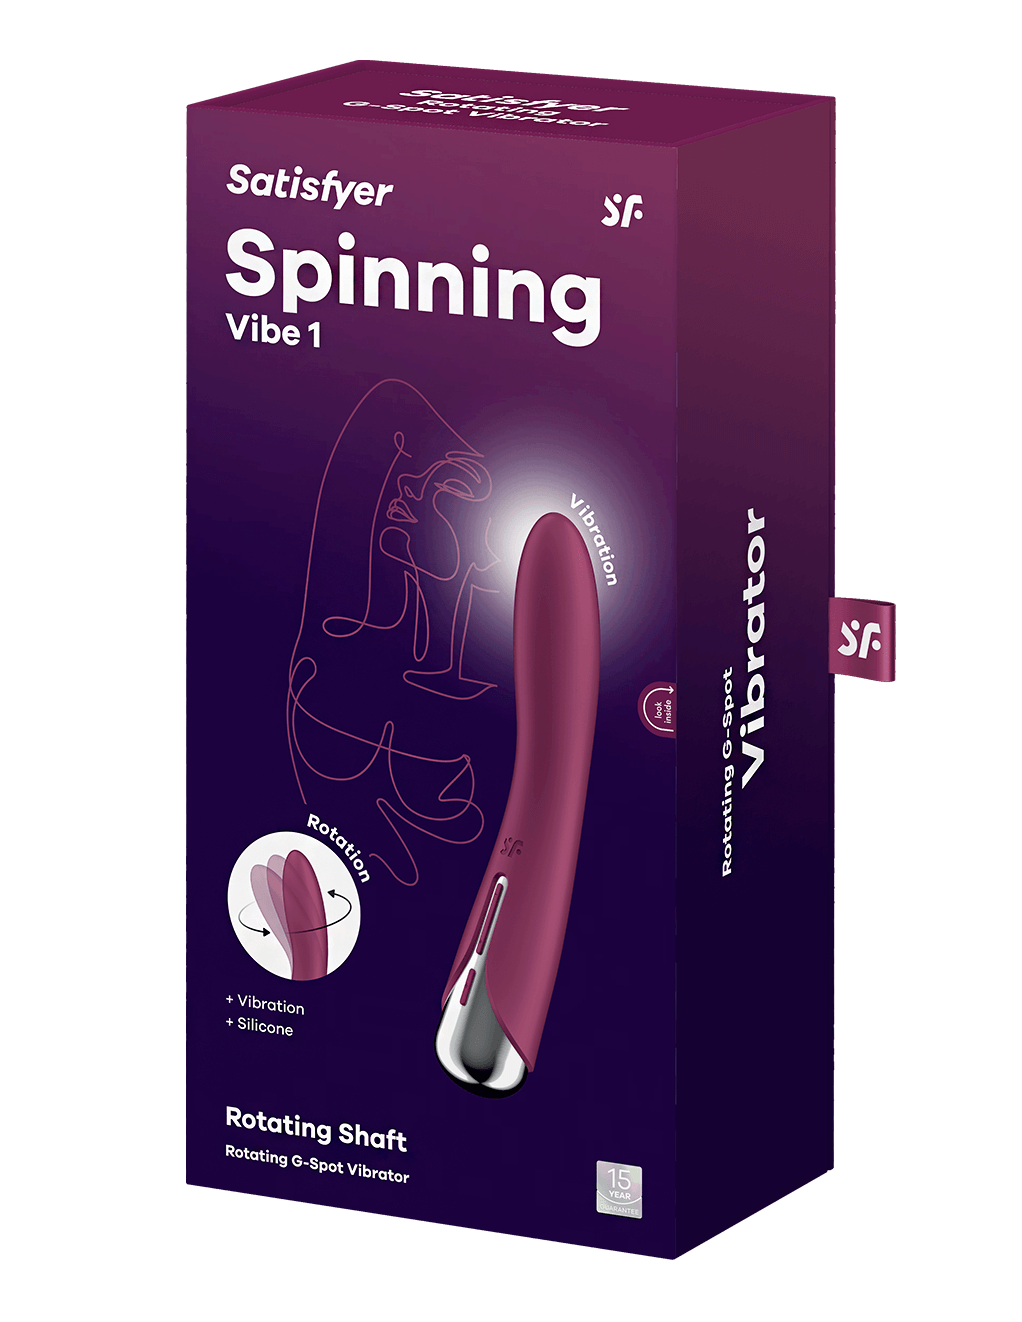 Satisfyer Spinning Vibe 1 - Red - Box